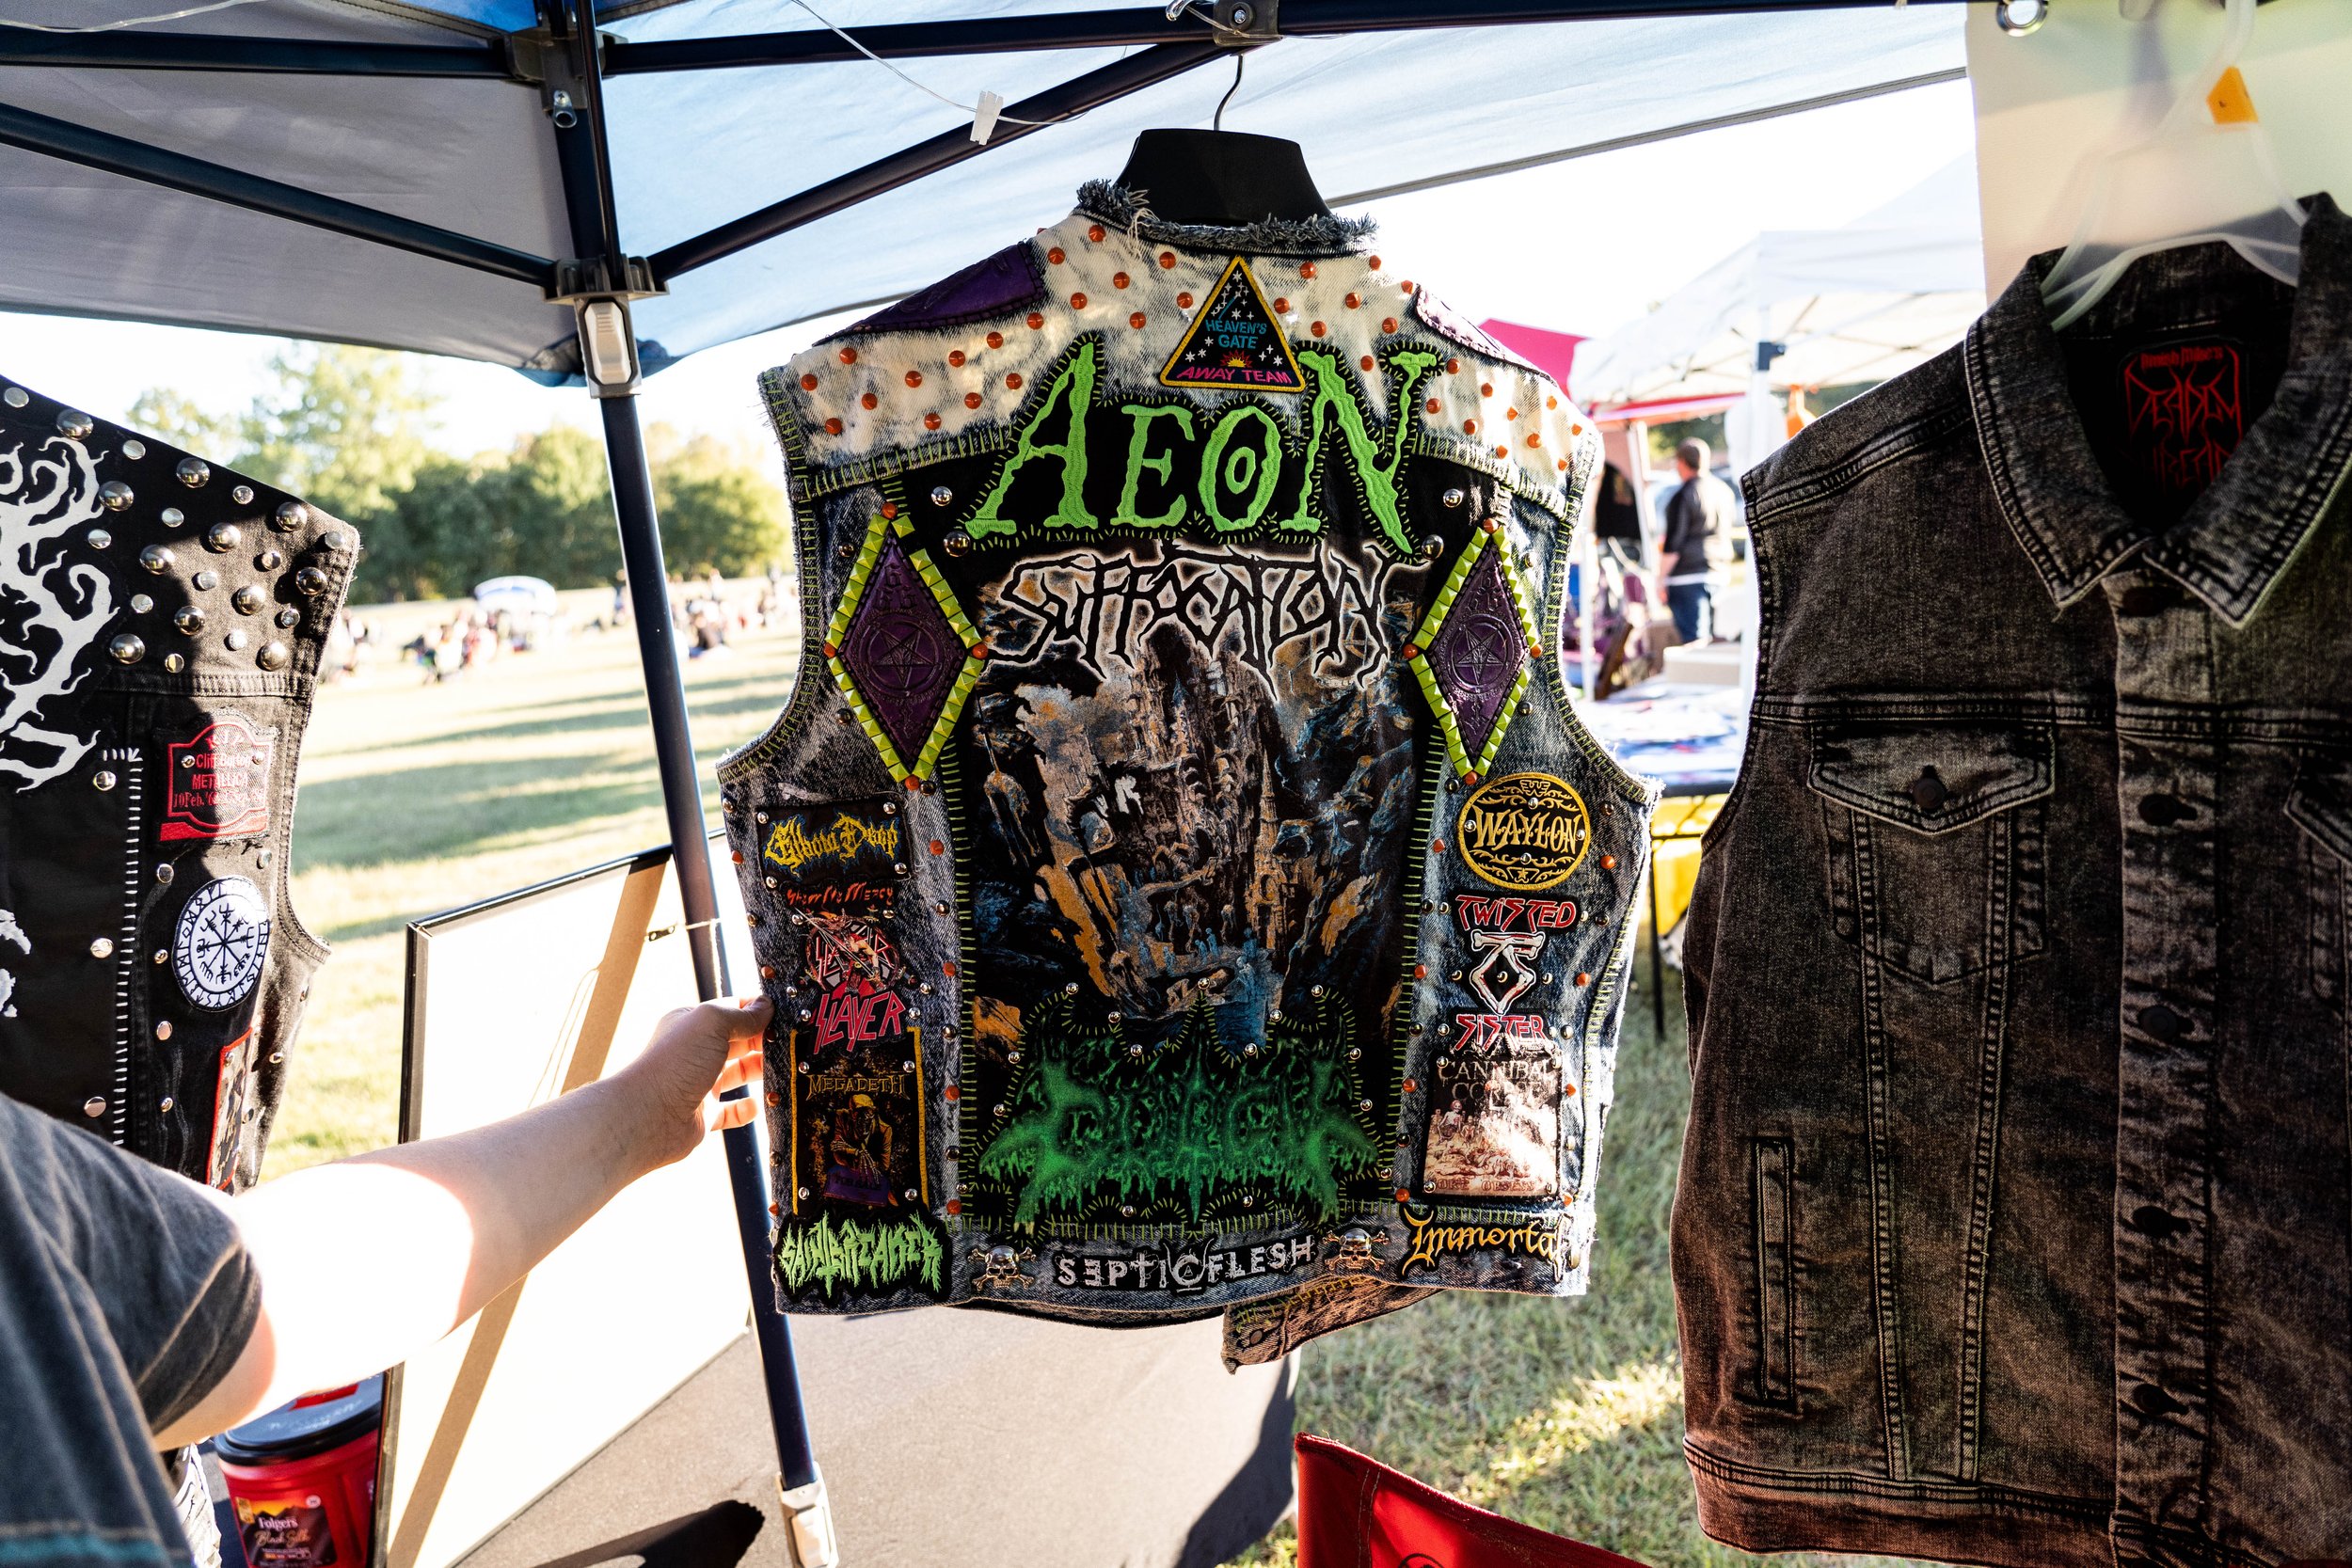 A battle jacket at Amish Mike's Deadly Threads